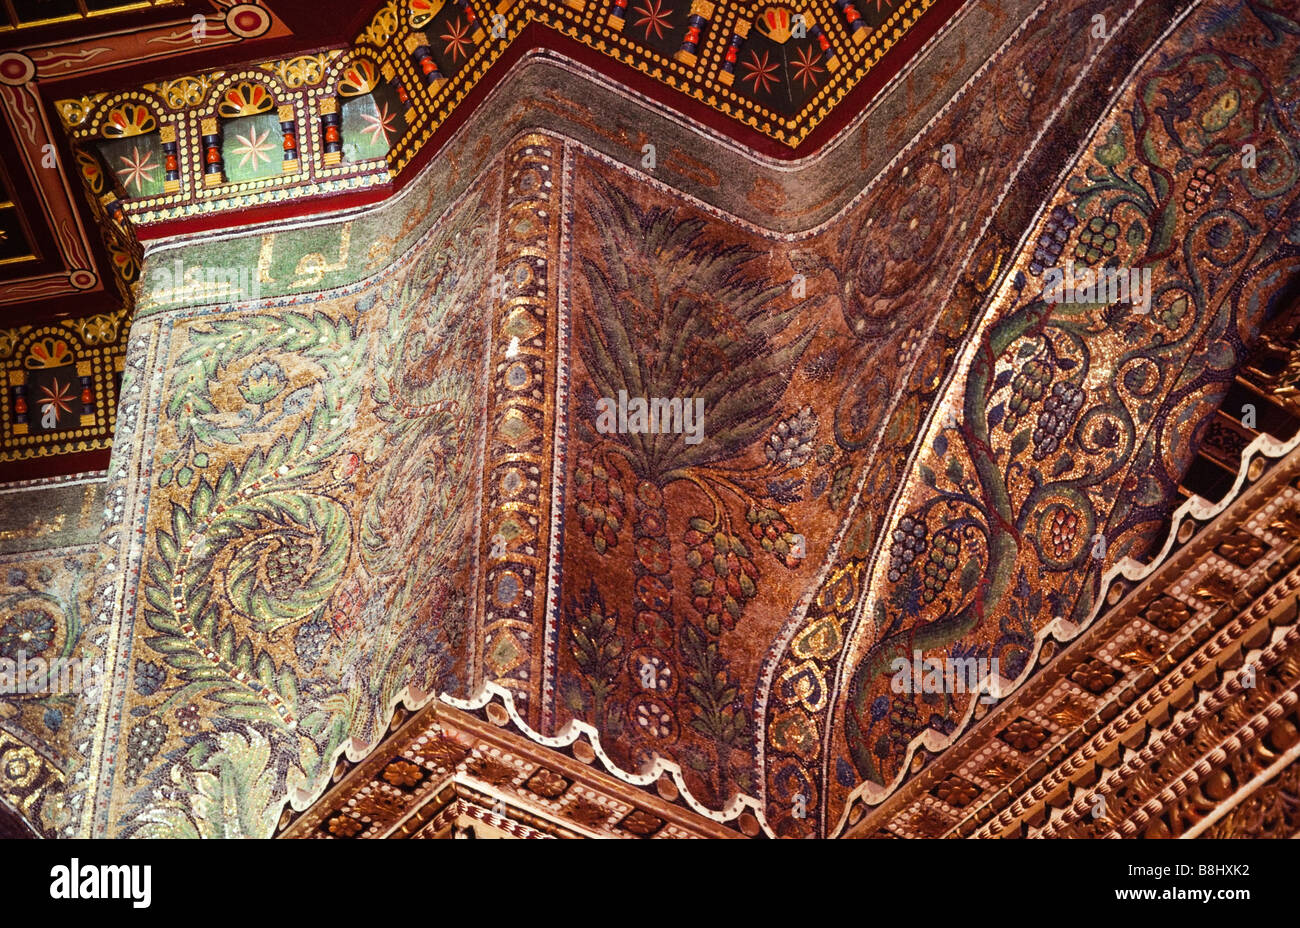 The Dome Of The Rock Jerusalem Interior Mosaic Decoration